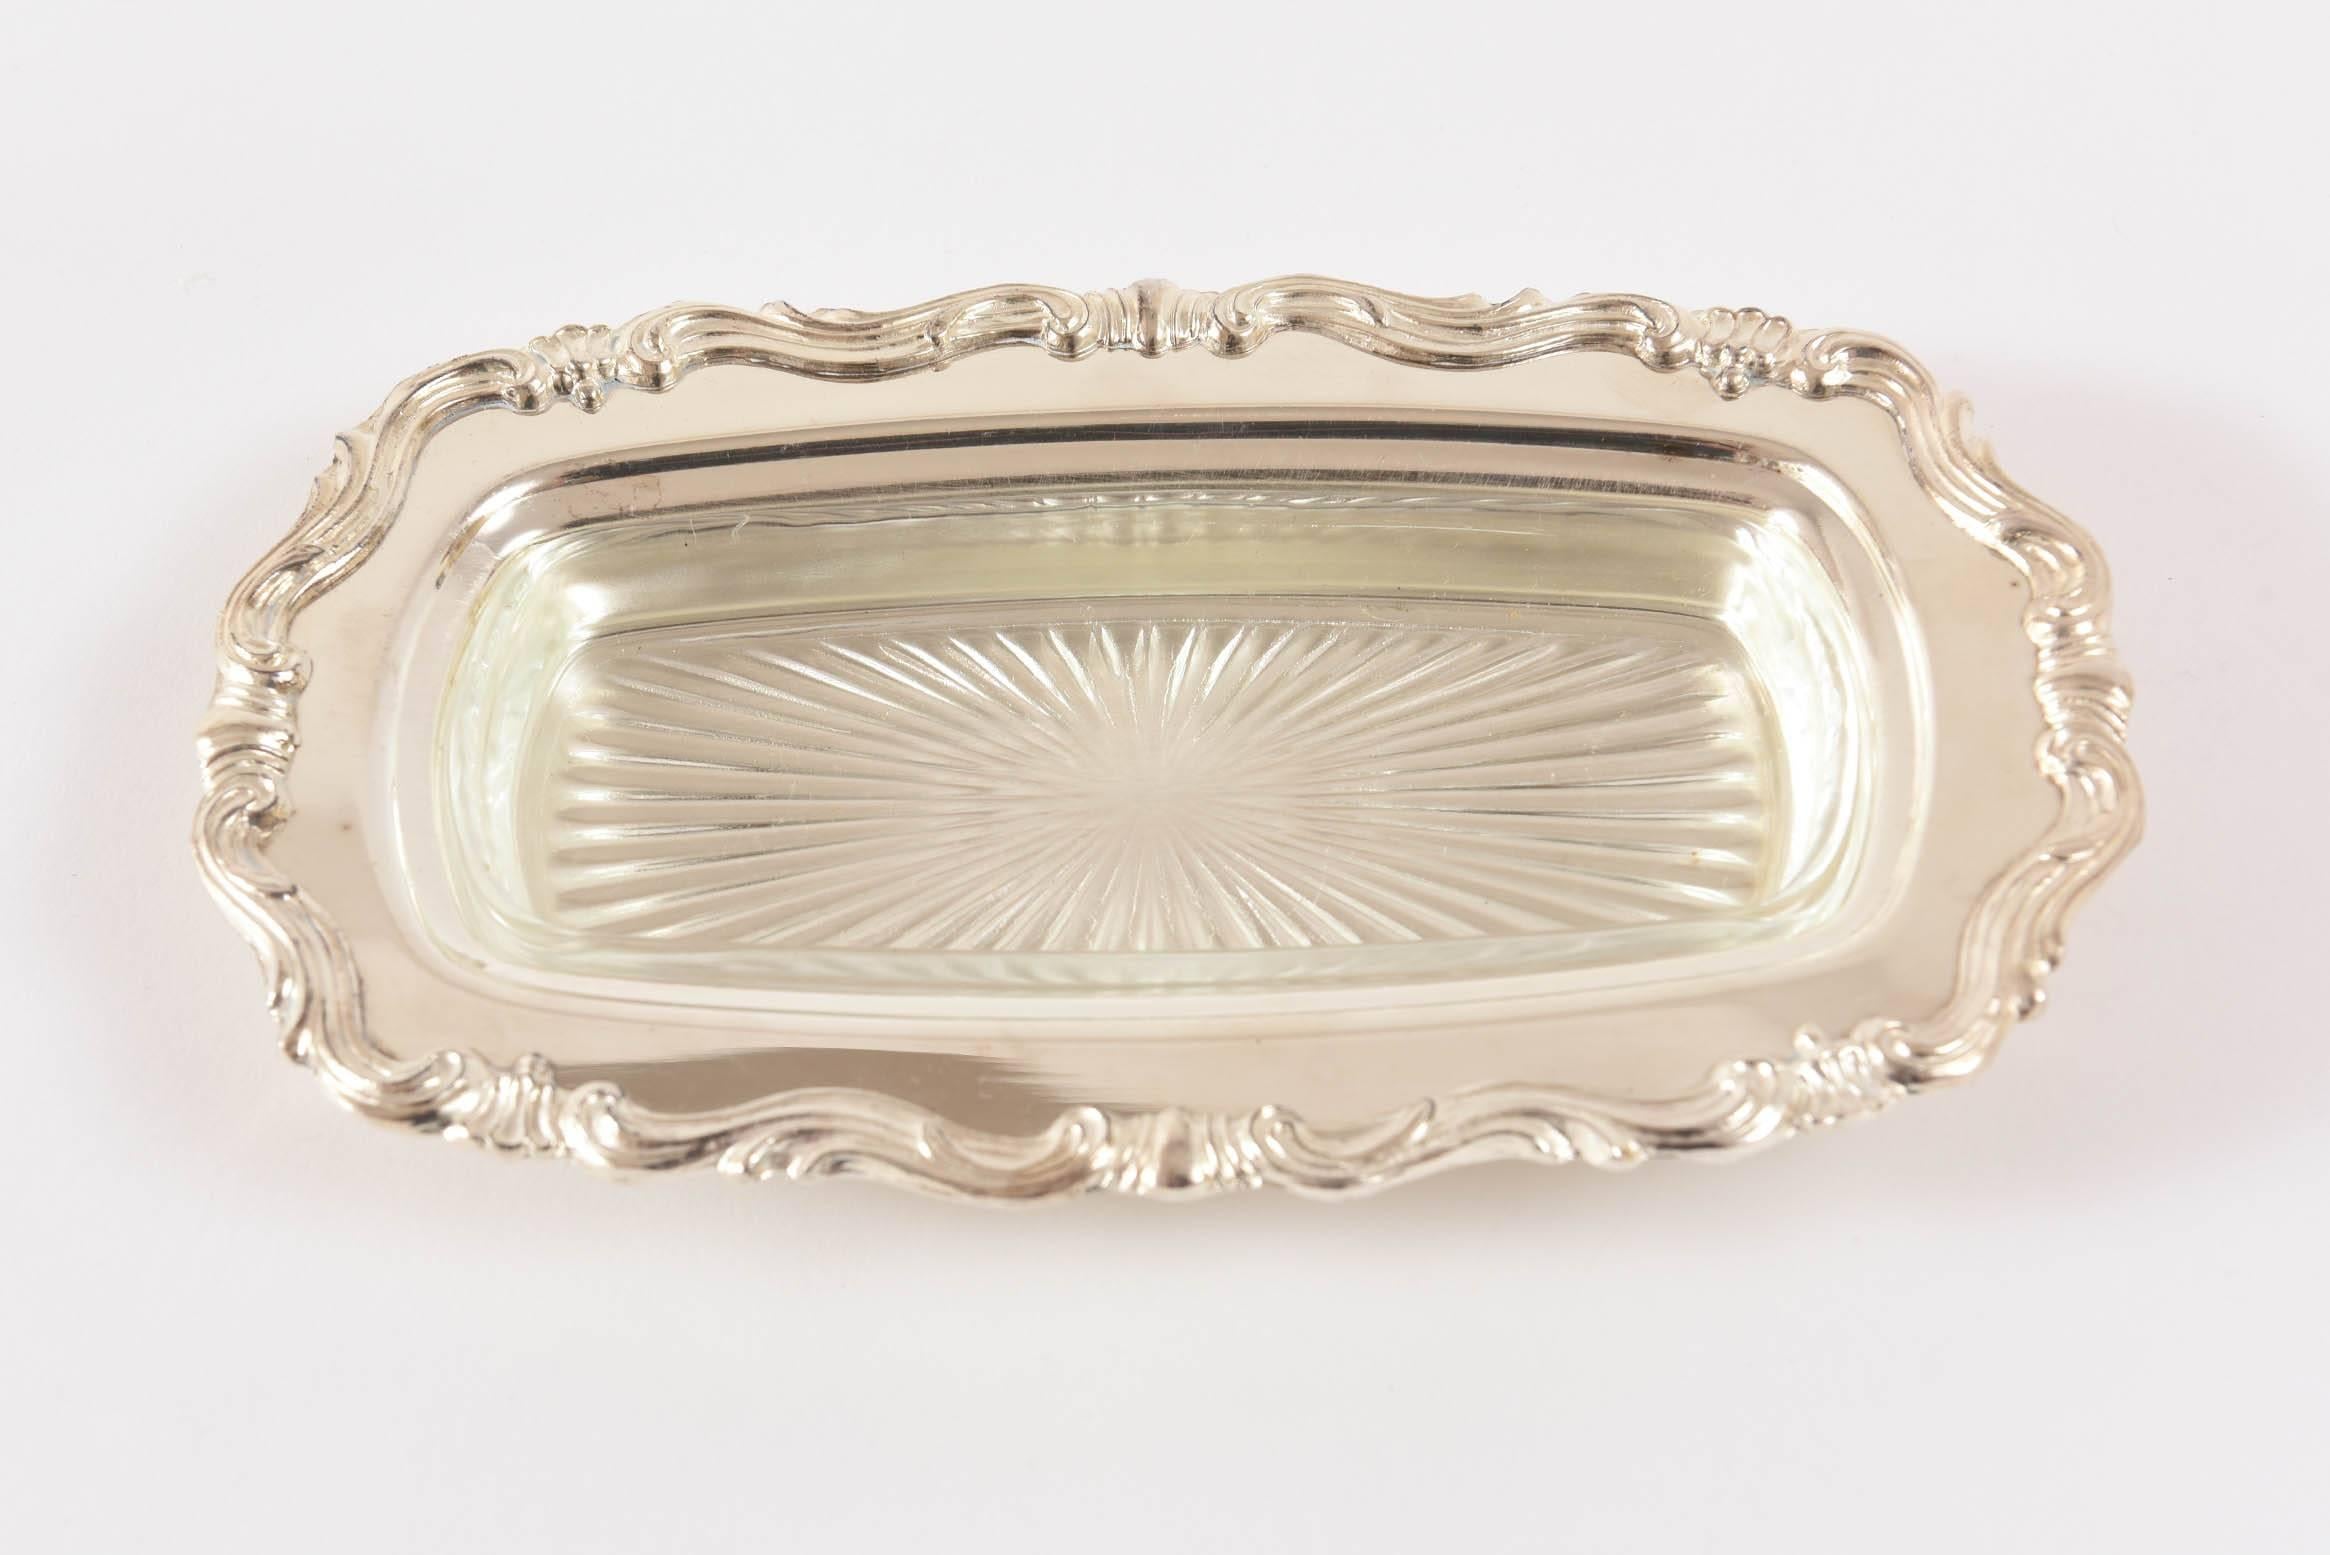 Hand-Crafted Charming Silver Plated Butter Dish, Vintage